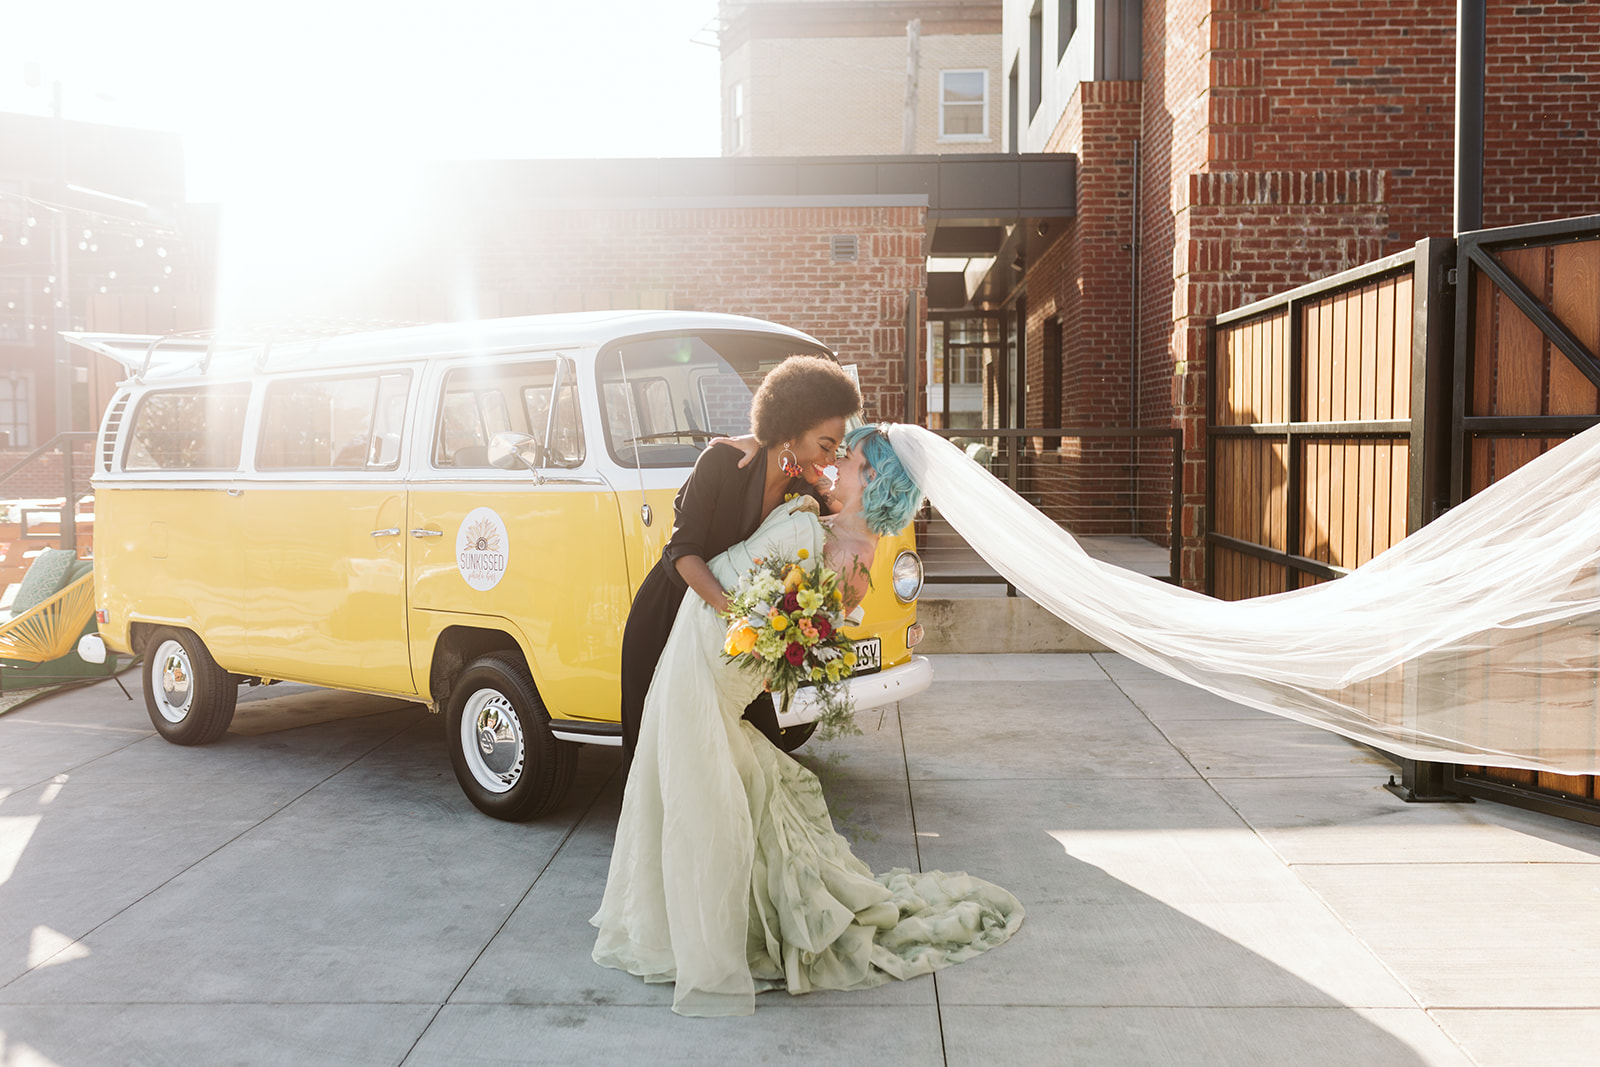 The brides dance and laugh in front of a light yellow VW van.